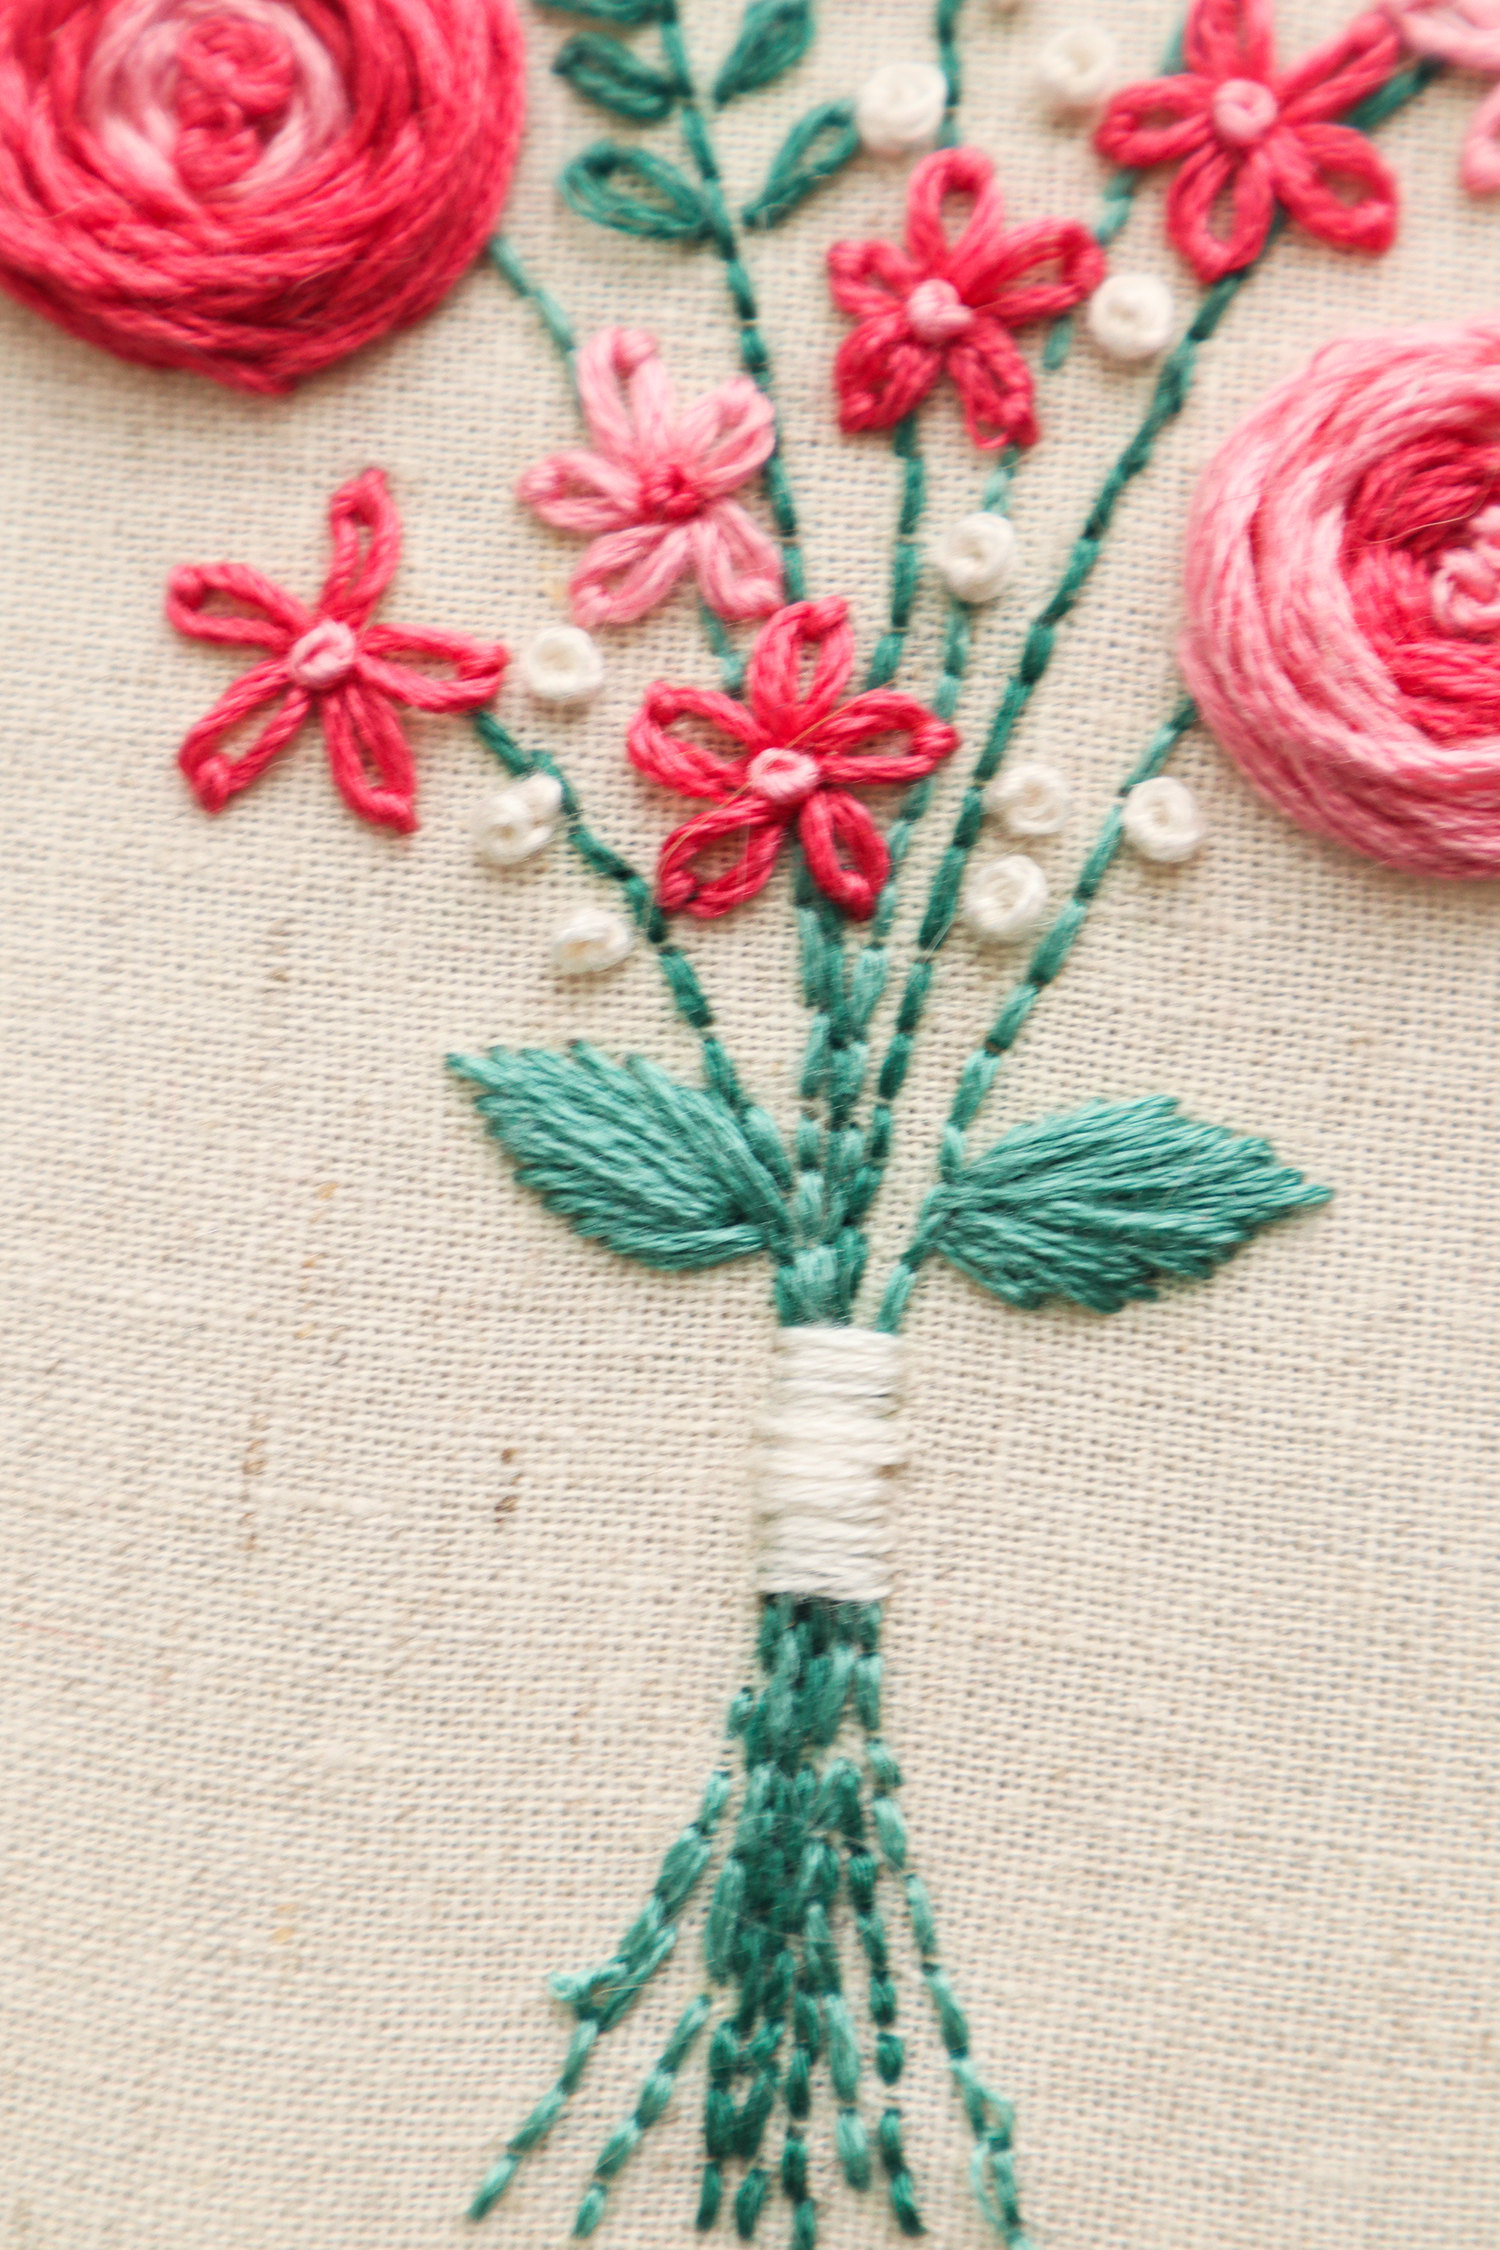 Getting Started With Cross Stitch Embroidery